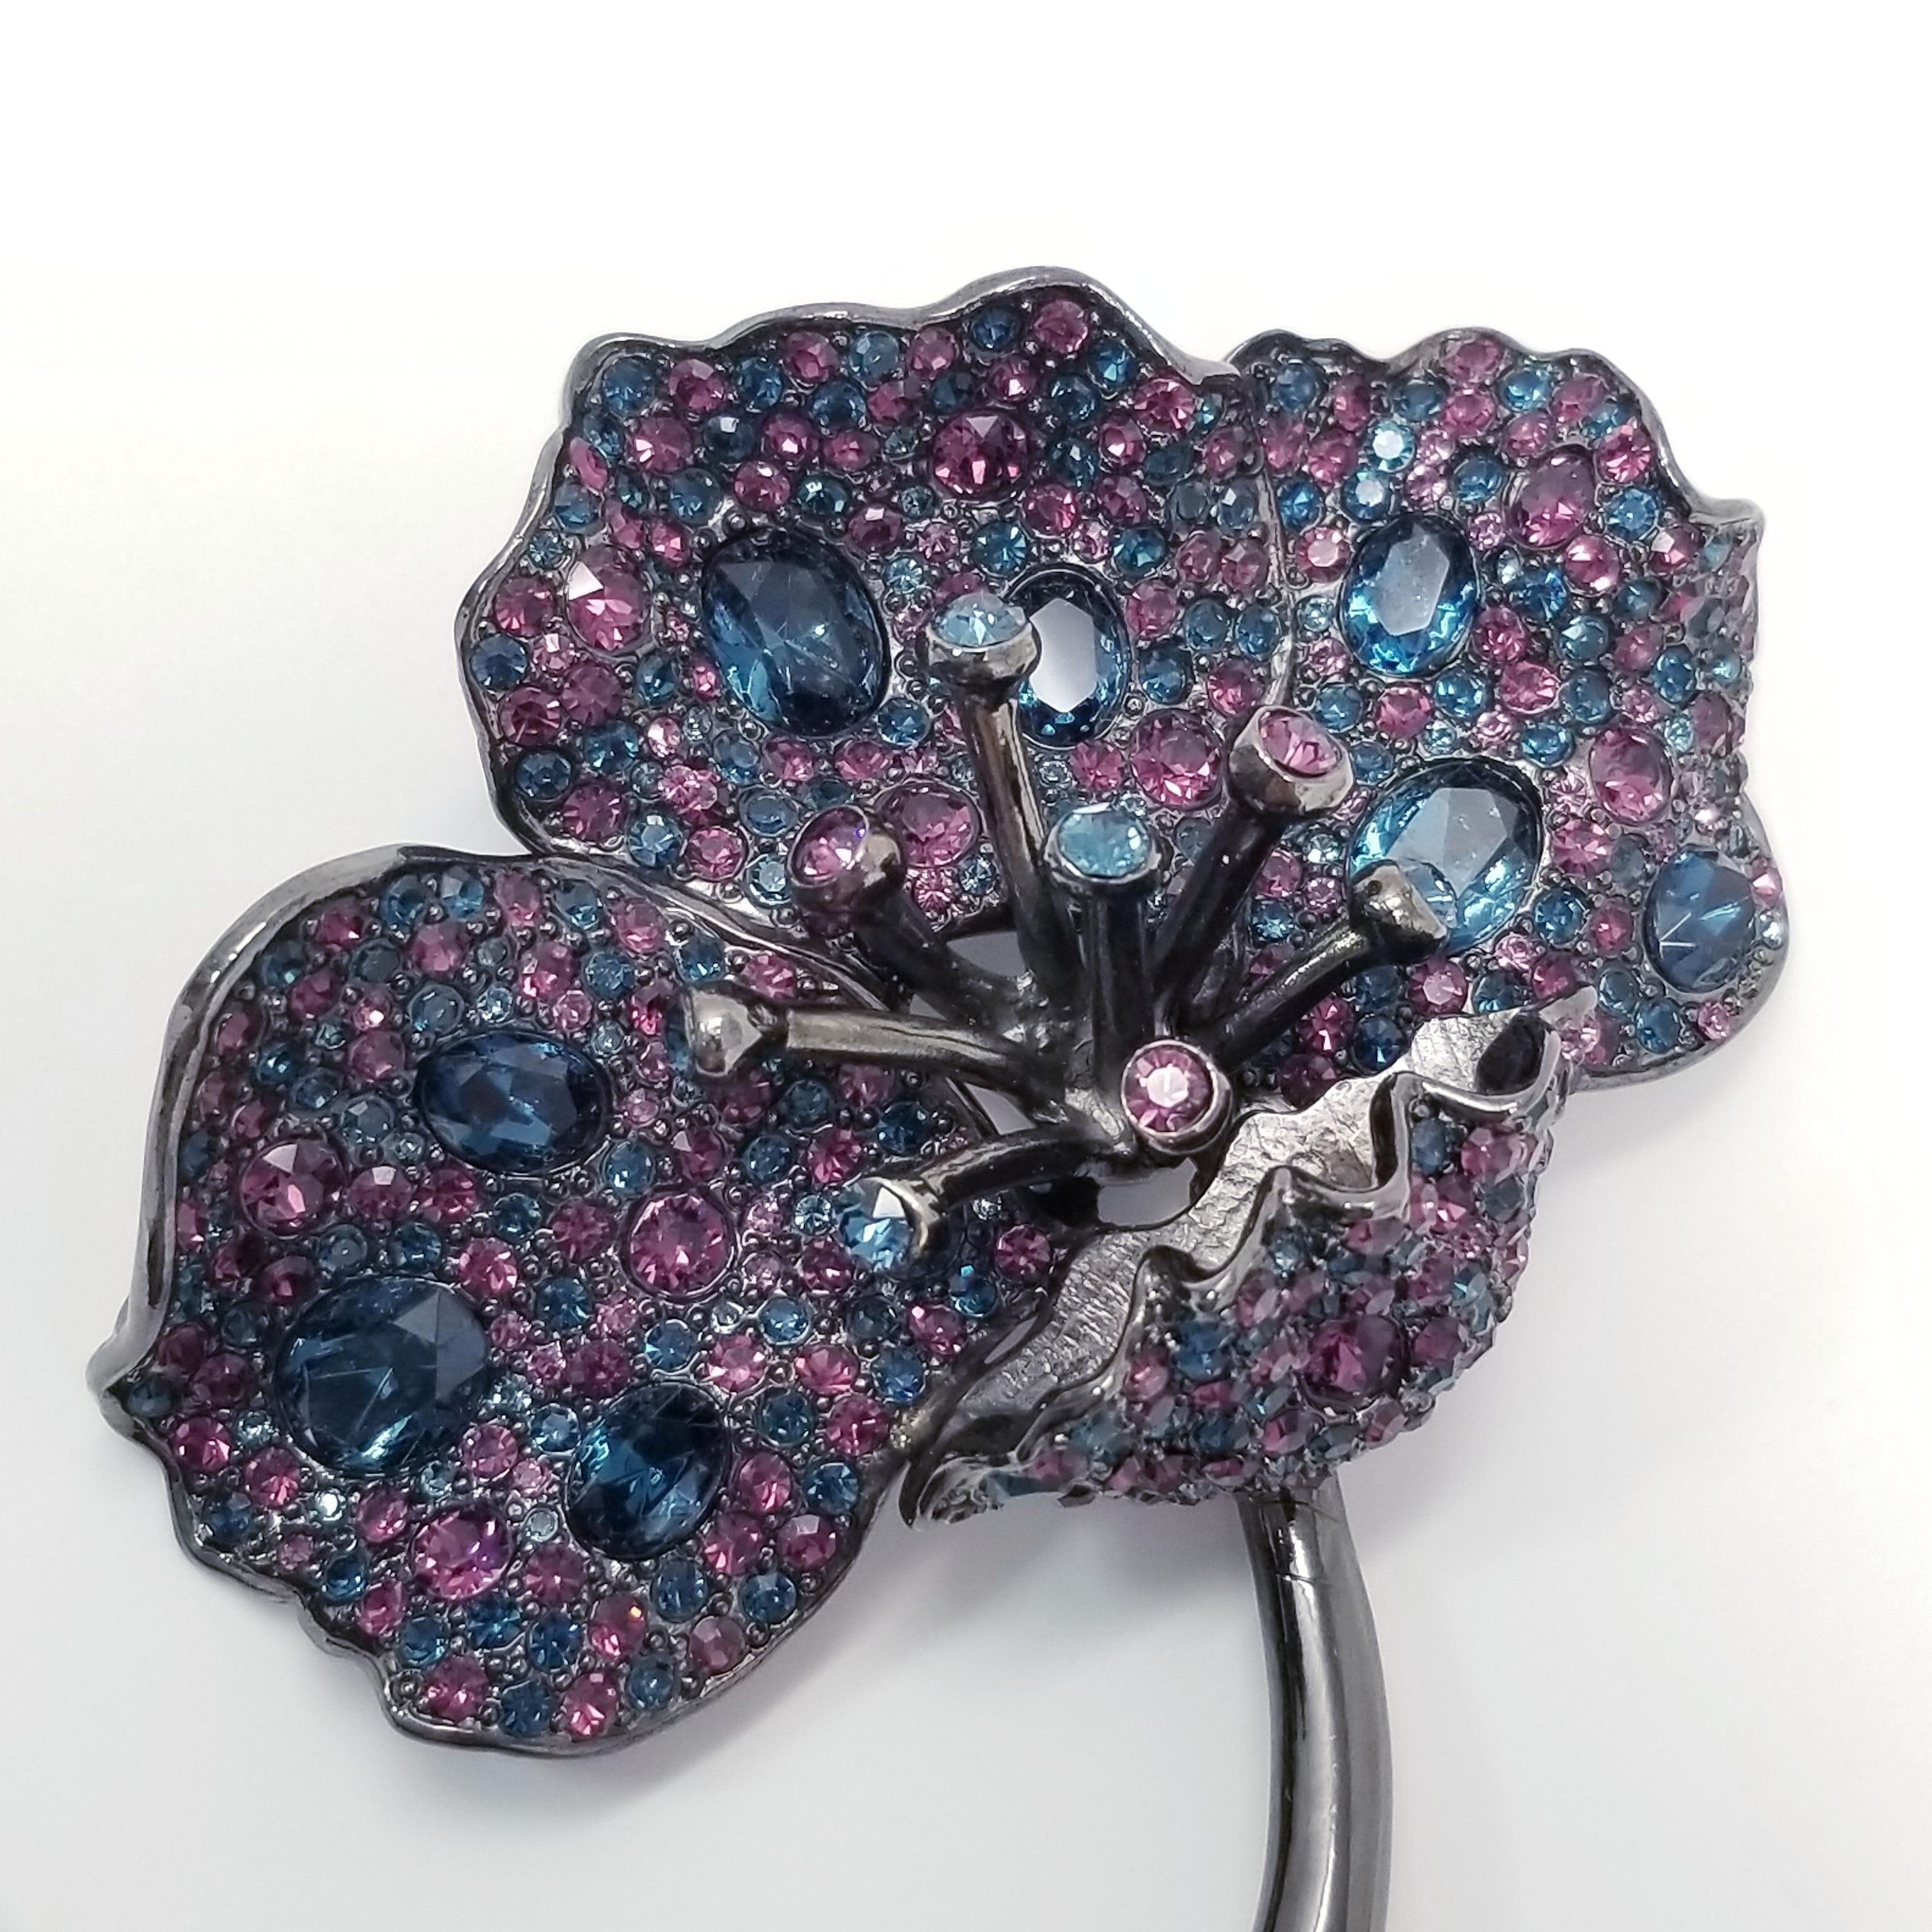 Pave jungle poppy brooch by Kenneth Jay Lane. Exotic cosmic colors! This dark gray gunmetal-tone flower is decorated with faceted sapphire and amethyst colored crystals. 

...

Clasp: Pin stem with safety clasp

Metal Type: Dark gray gunmetal